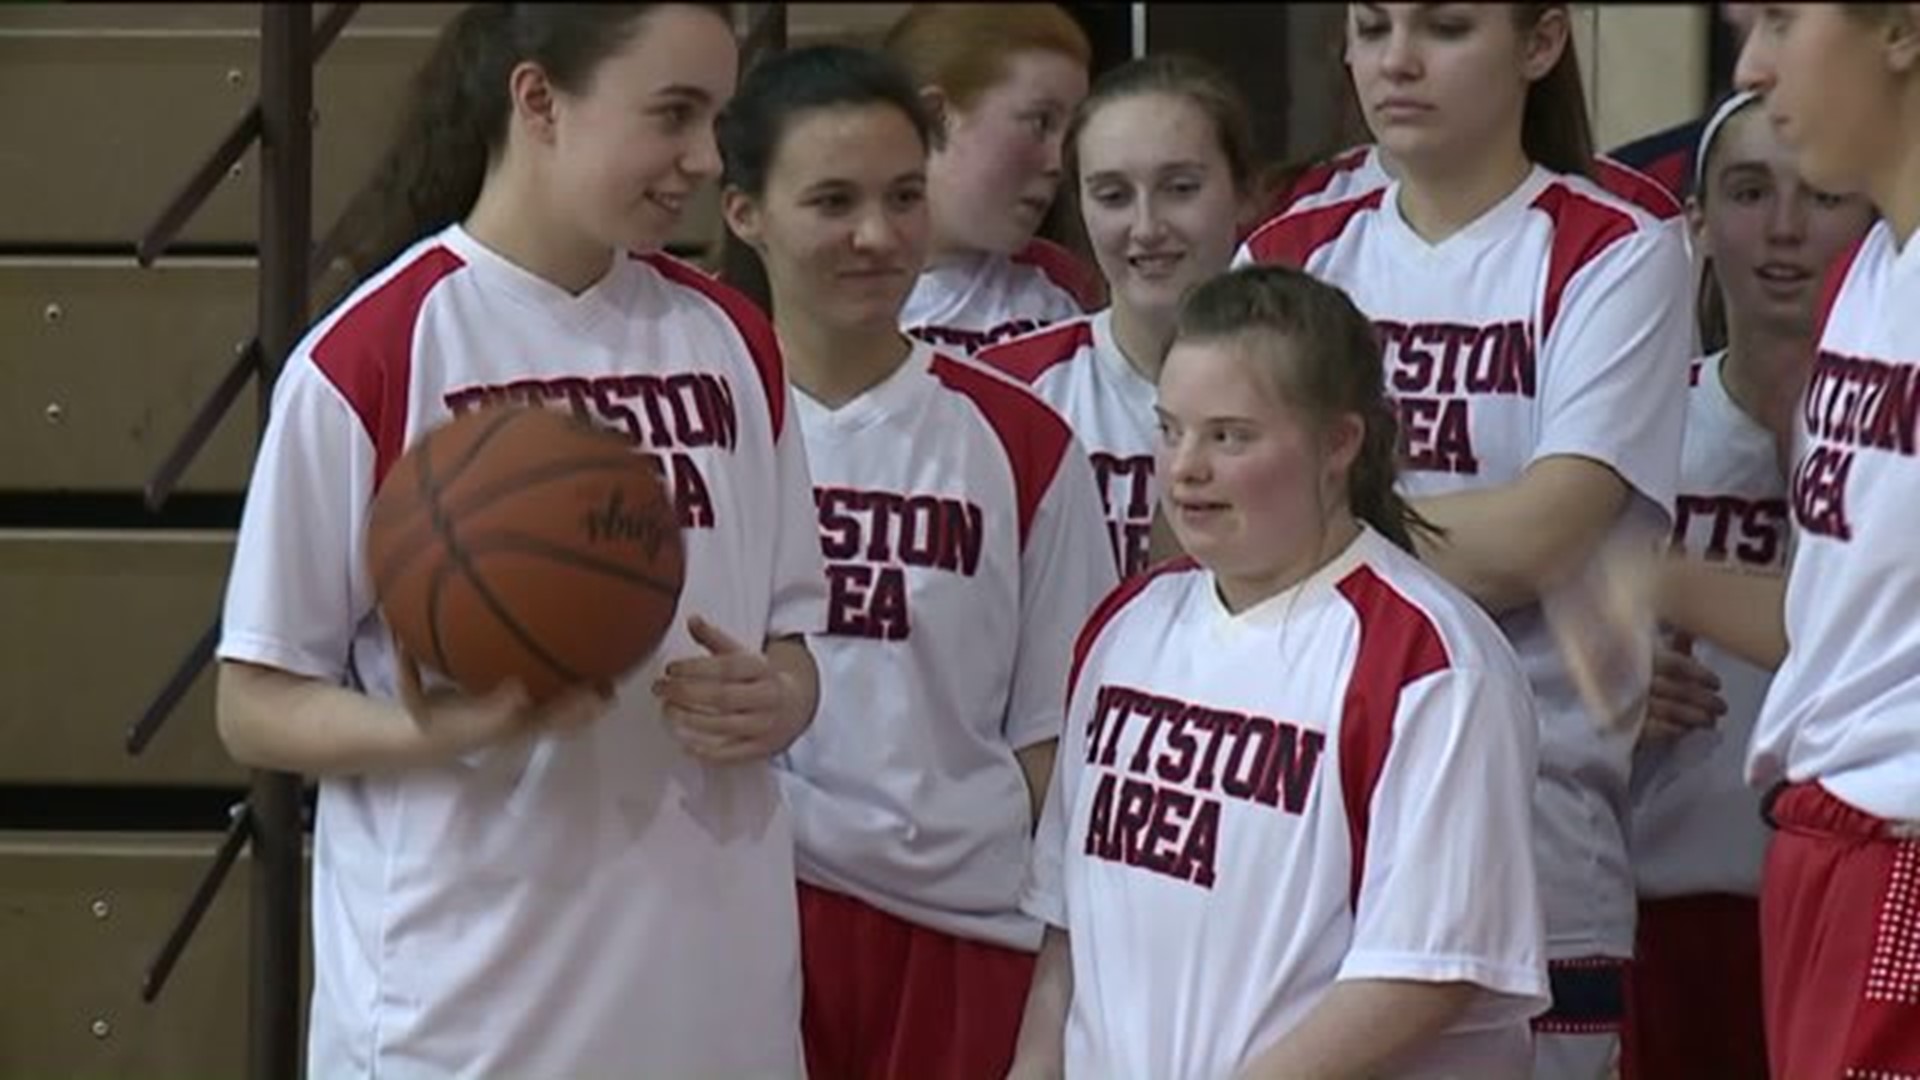 Watch: Student with Down Syndrome Takes the Court, Crowd Goes Wild